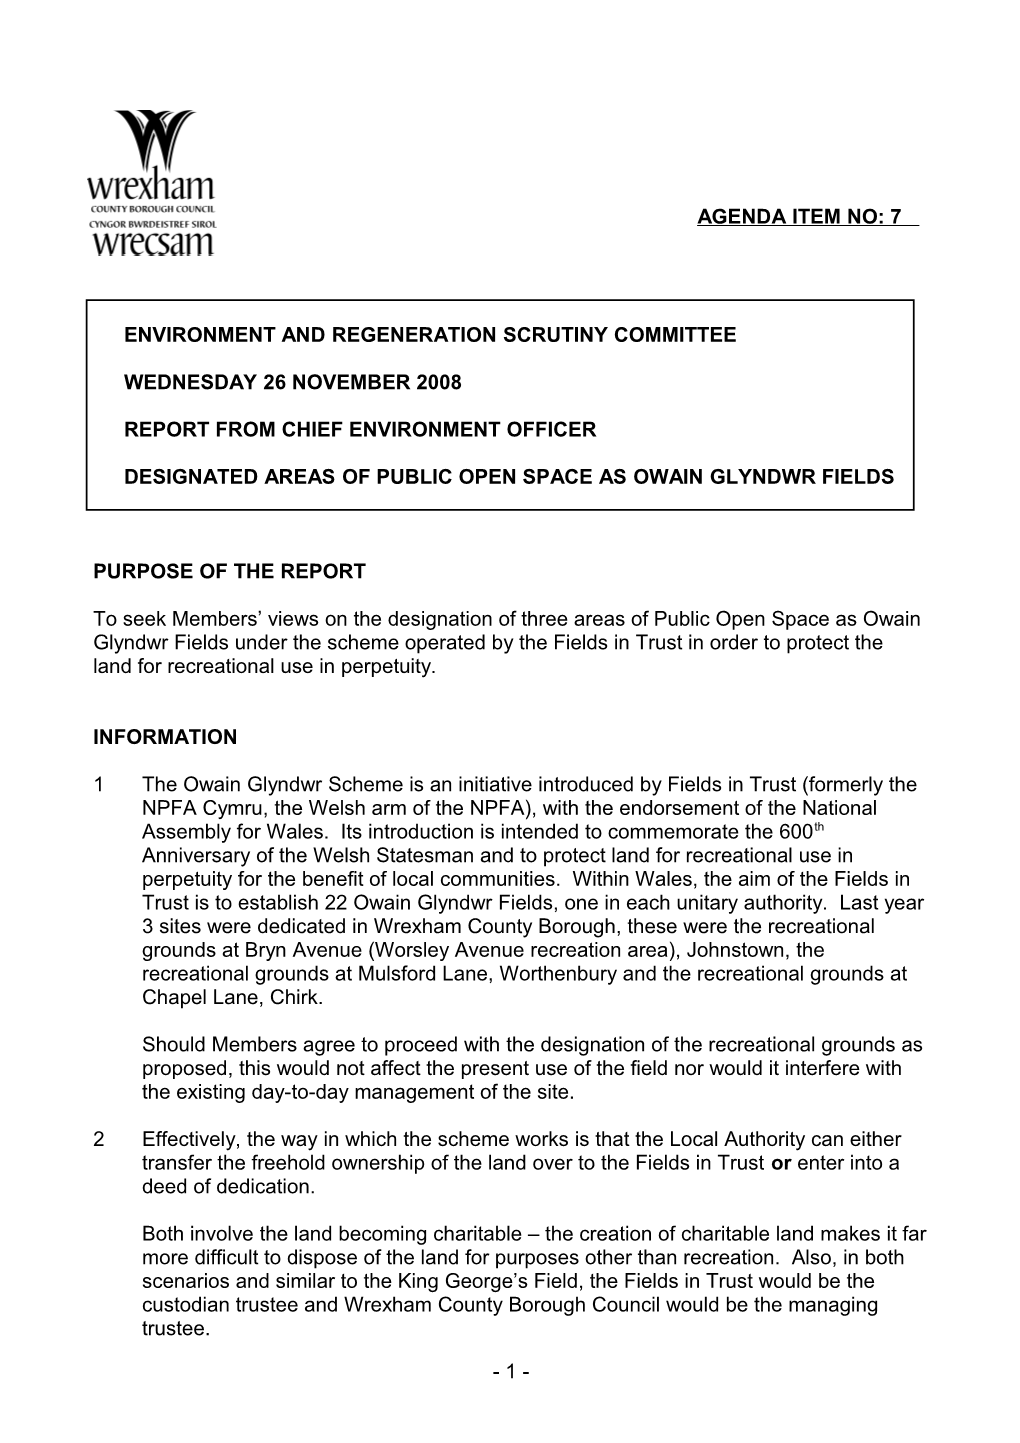 26/11/2008 Report : Environment and Regeneration Scrutiny Committee